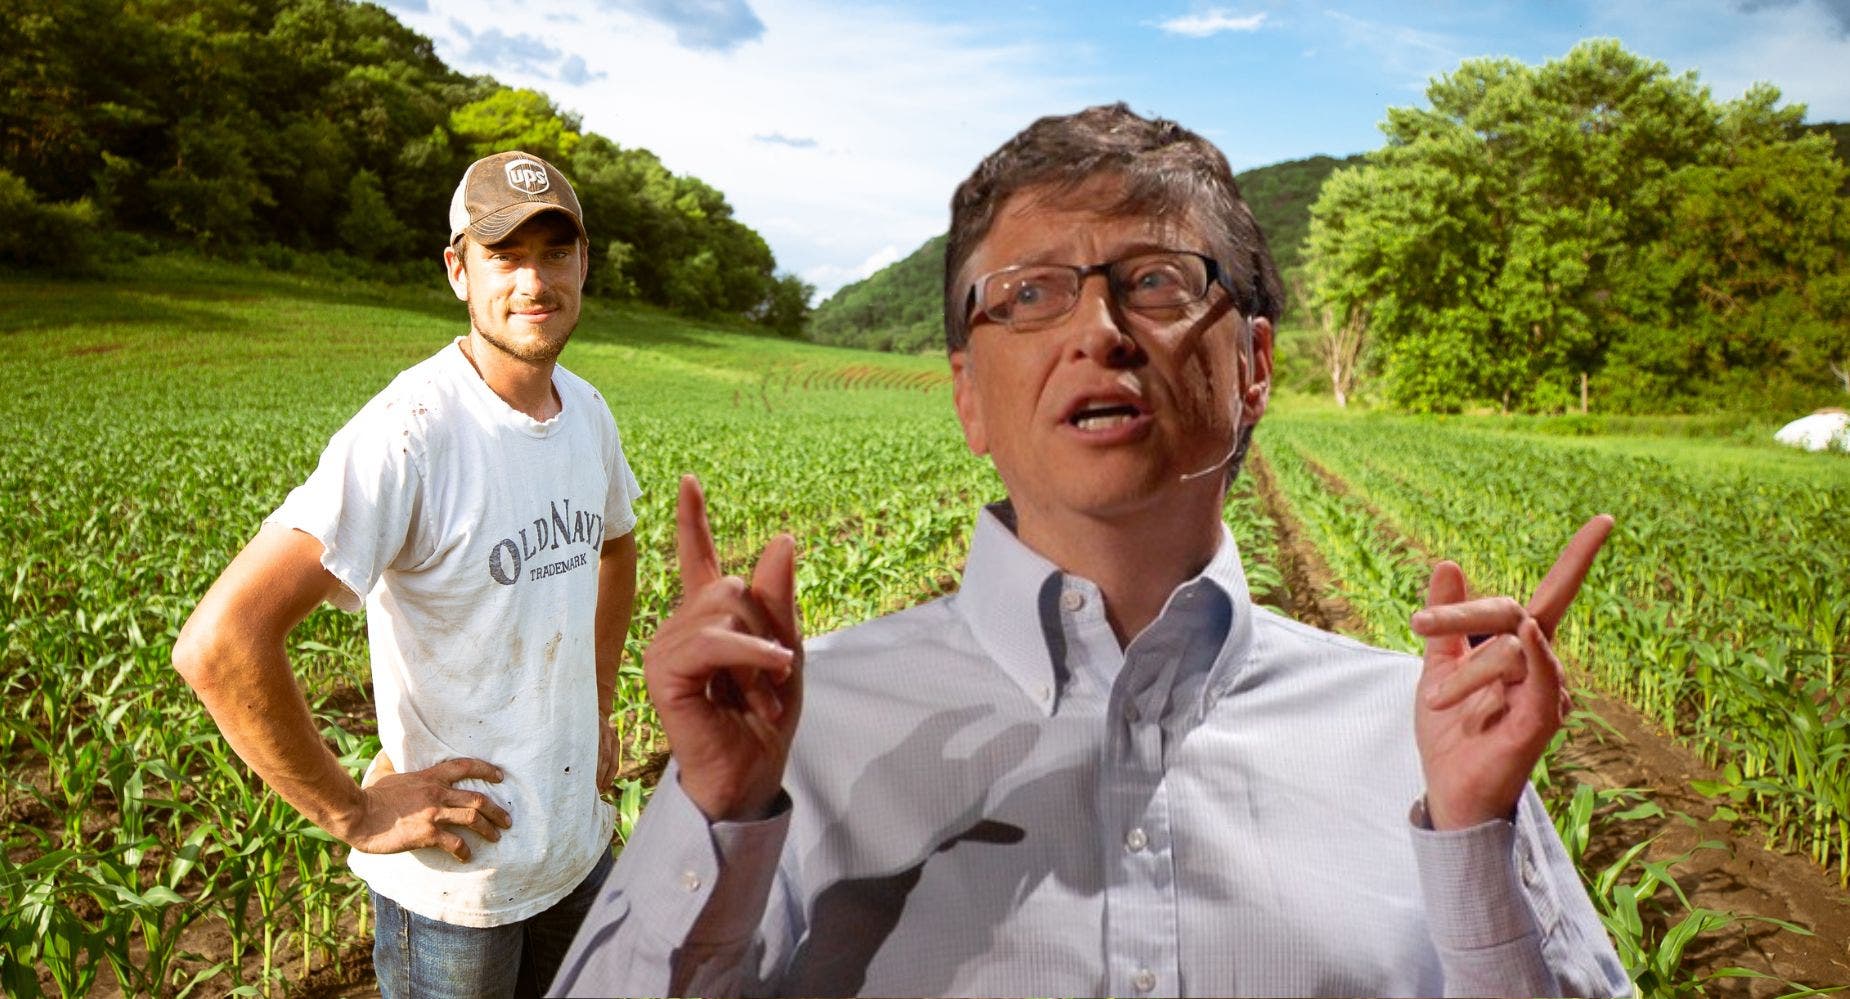 Bill Gates Called Out By Farmer For Secretly Buying Up US Farmland: 'I Don't Want Him To Control A Single Acre'